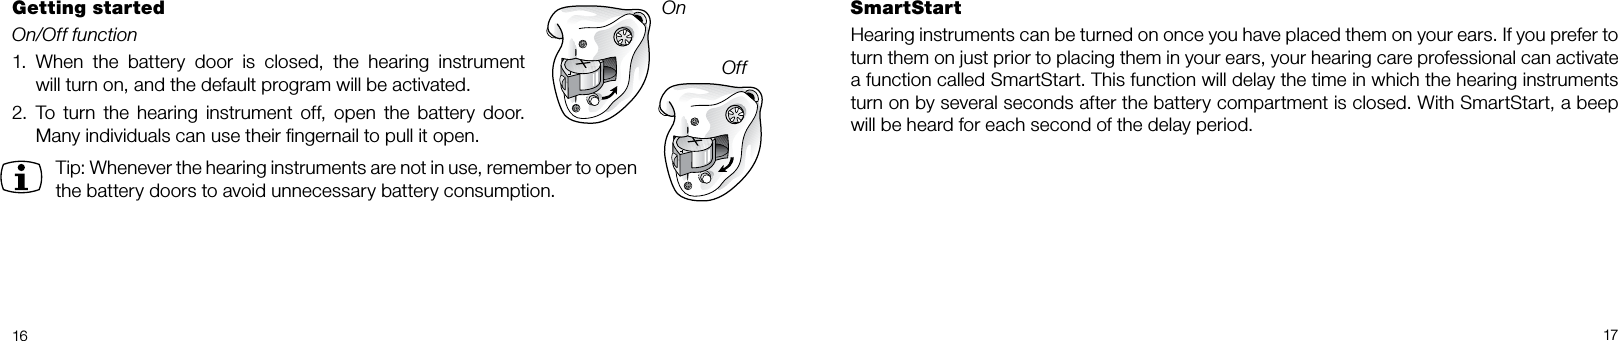 16 17SmartStartHearing instruments can be turned on once you have placed them on your ears. If you prefer to turn them on just prior to placing them in your ears, your hearing care professional can activate a function called SmartStart. This function will delay the time in which the hearing instruments turn on by several seconds after the battery compartment is closed. With SmartStart, a beep will be heard for each second of the delay period.Getting startedOn/Off function1.  When the battery door is closed, the hearing instrument  will turn on, and the default program will be activated. 2.  To turn the hearing instrument off, open the battery door. Many individuals can use their ﬁngernail to pull it open.Tip: Whenever the hearing instruments are not in use, remember to open the battery doors to avoid unnecessary battery consumption.OnOff